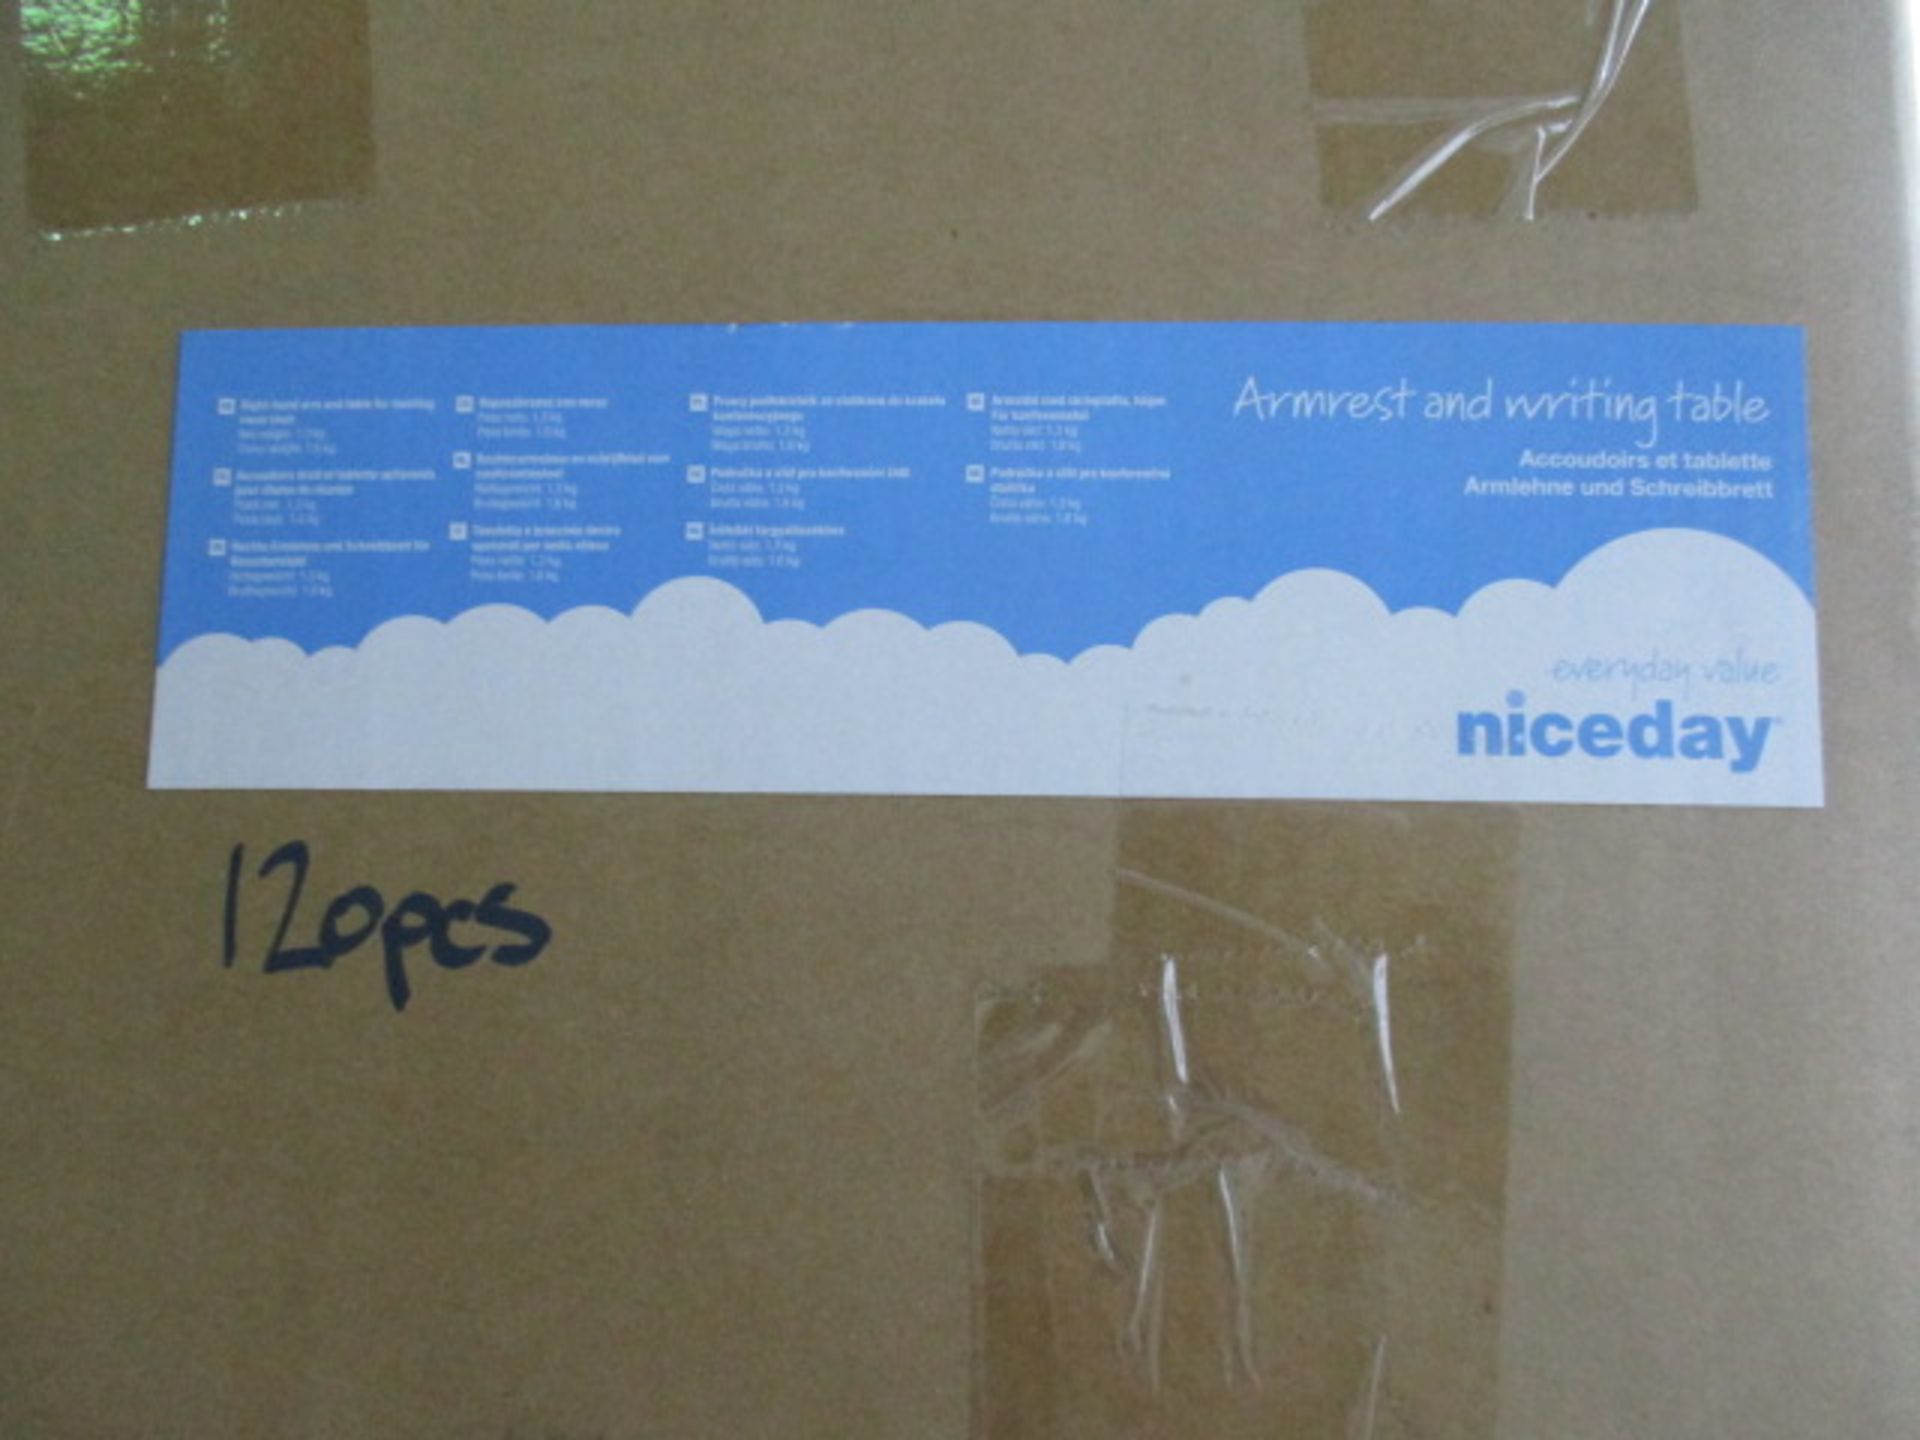 20pcs Factory Sealed Nice day Arm rest with writing table - rrp £14.99 - new and boxed - Image 2 of 2